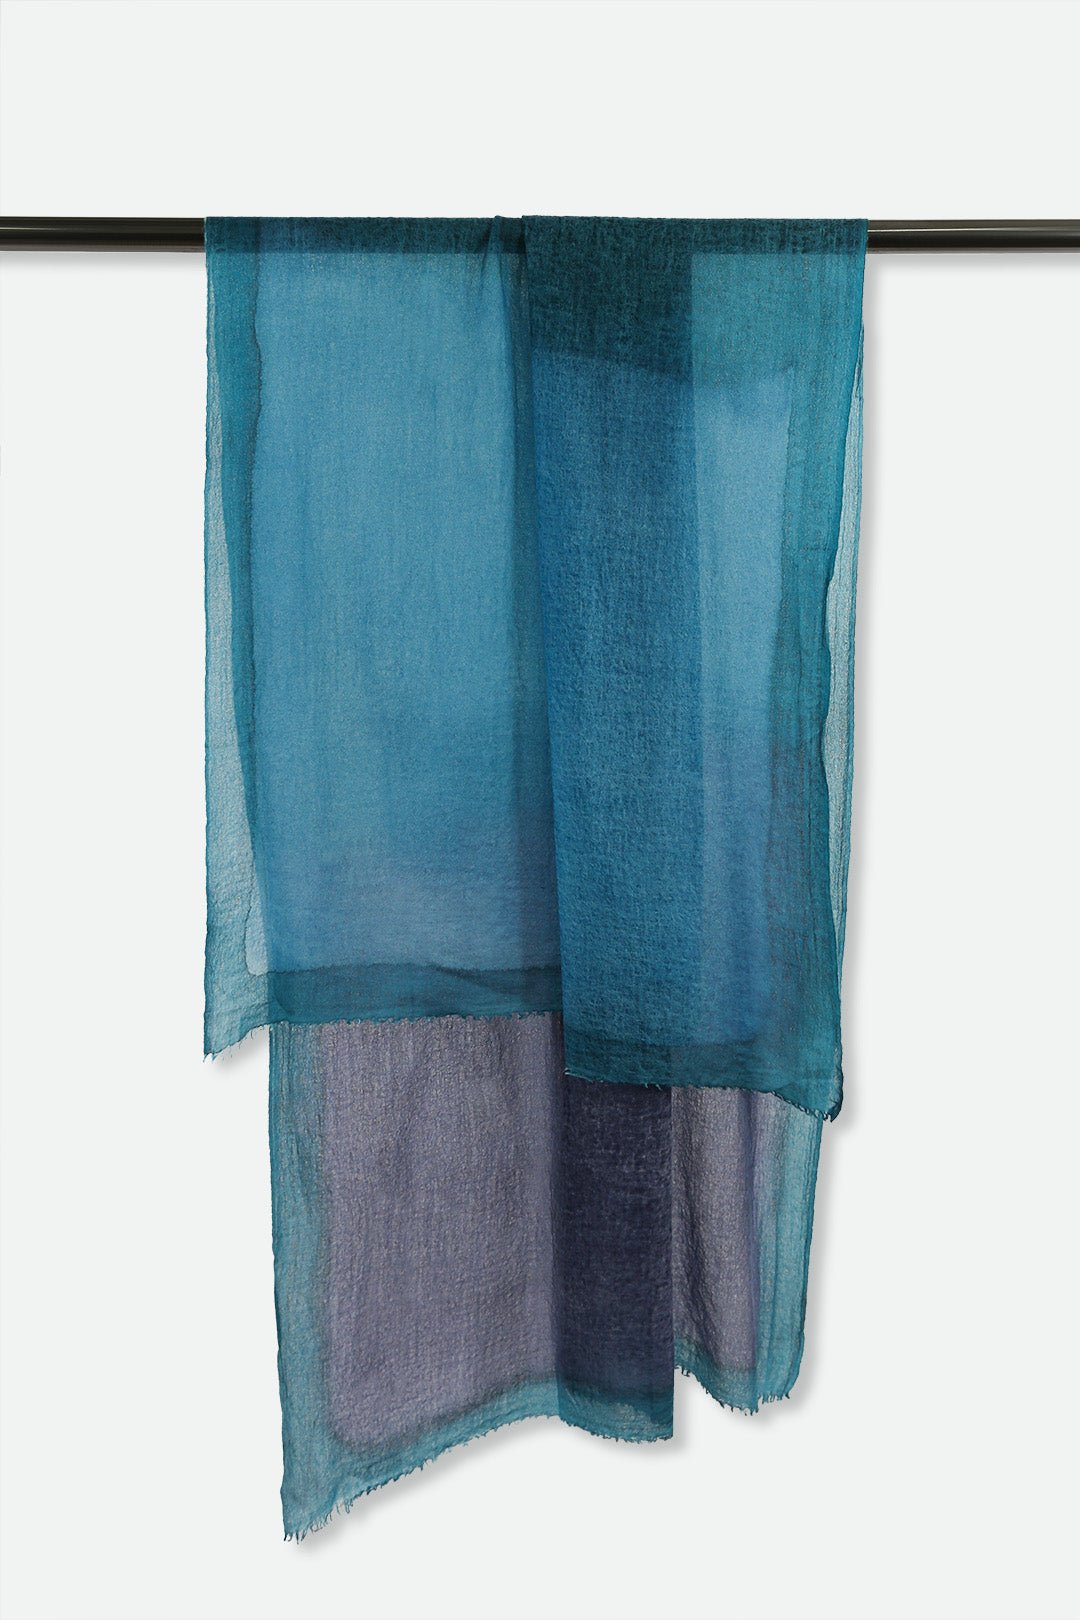 BORDERED ULTRAMARINE SCARF IN HAND DYED CASHMERE - Jarbo